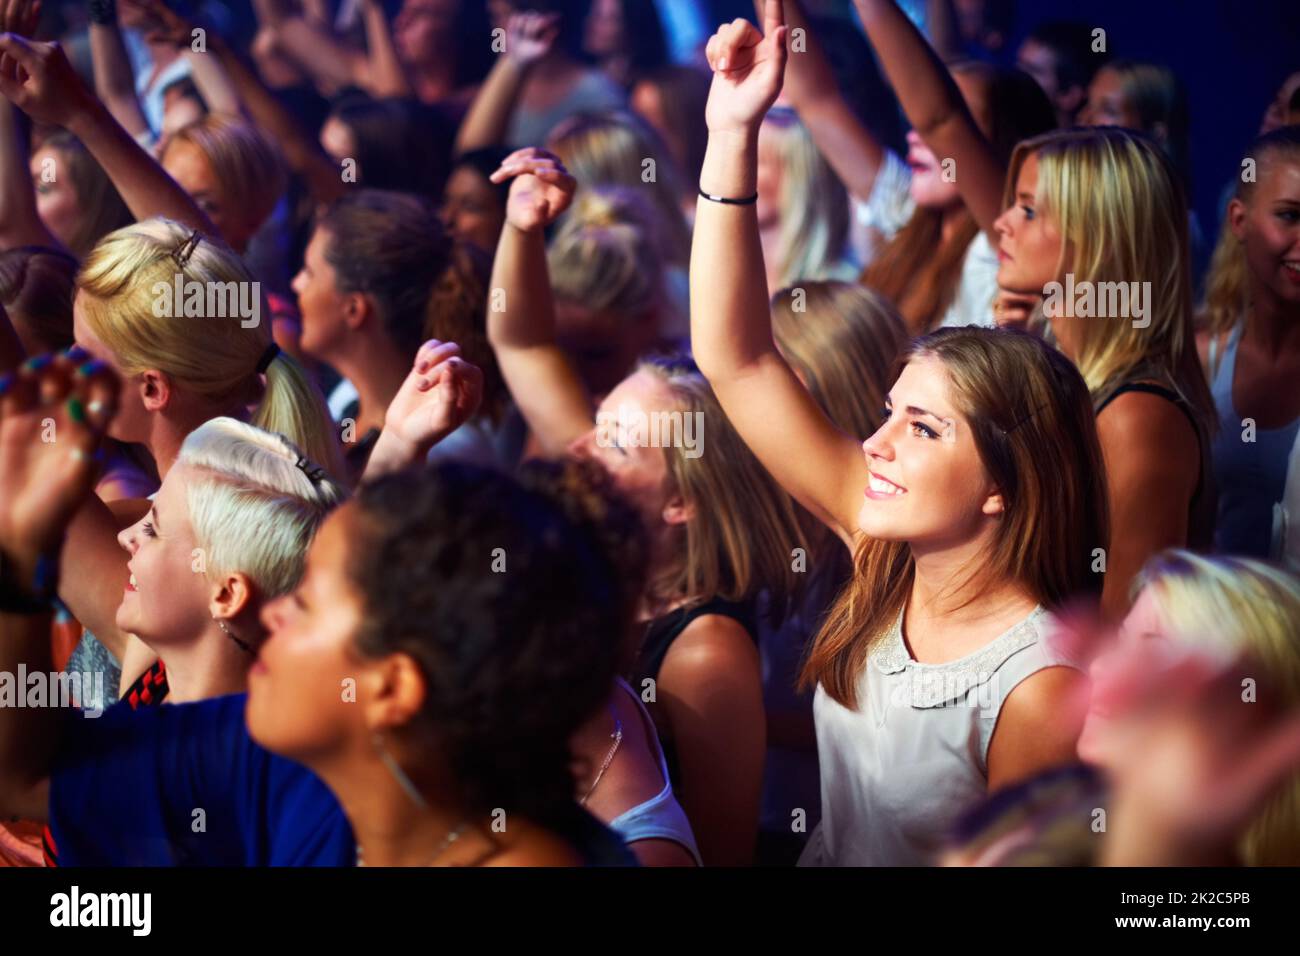 A group of adoring fans singing along to their favorite song. This concert was created for the sole purpose of this photo shoot, featuring 300 models and 3 live bands. All people in this shoot are model released. Stock Photo